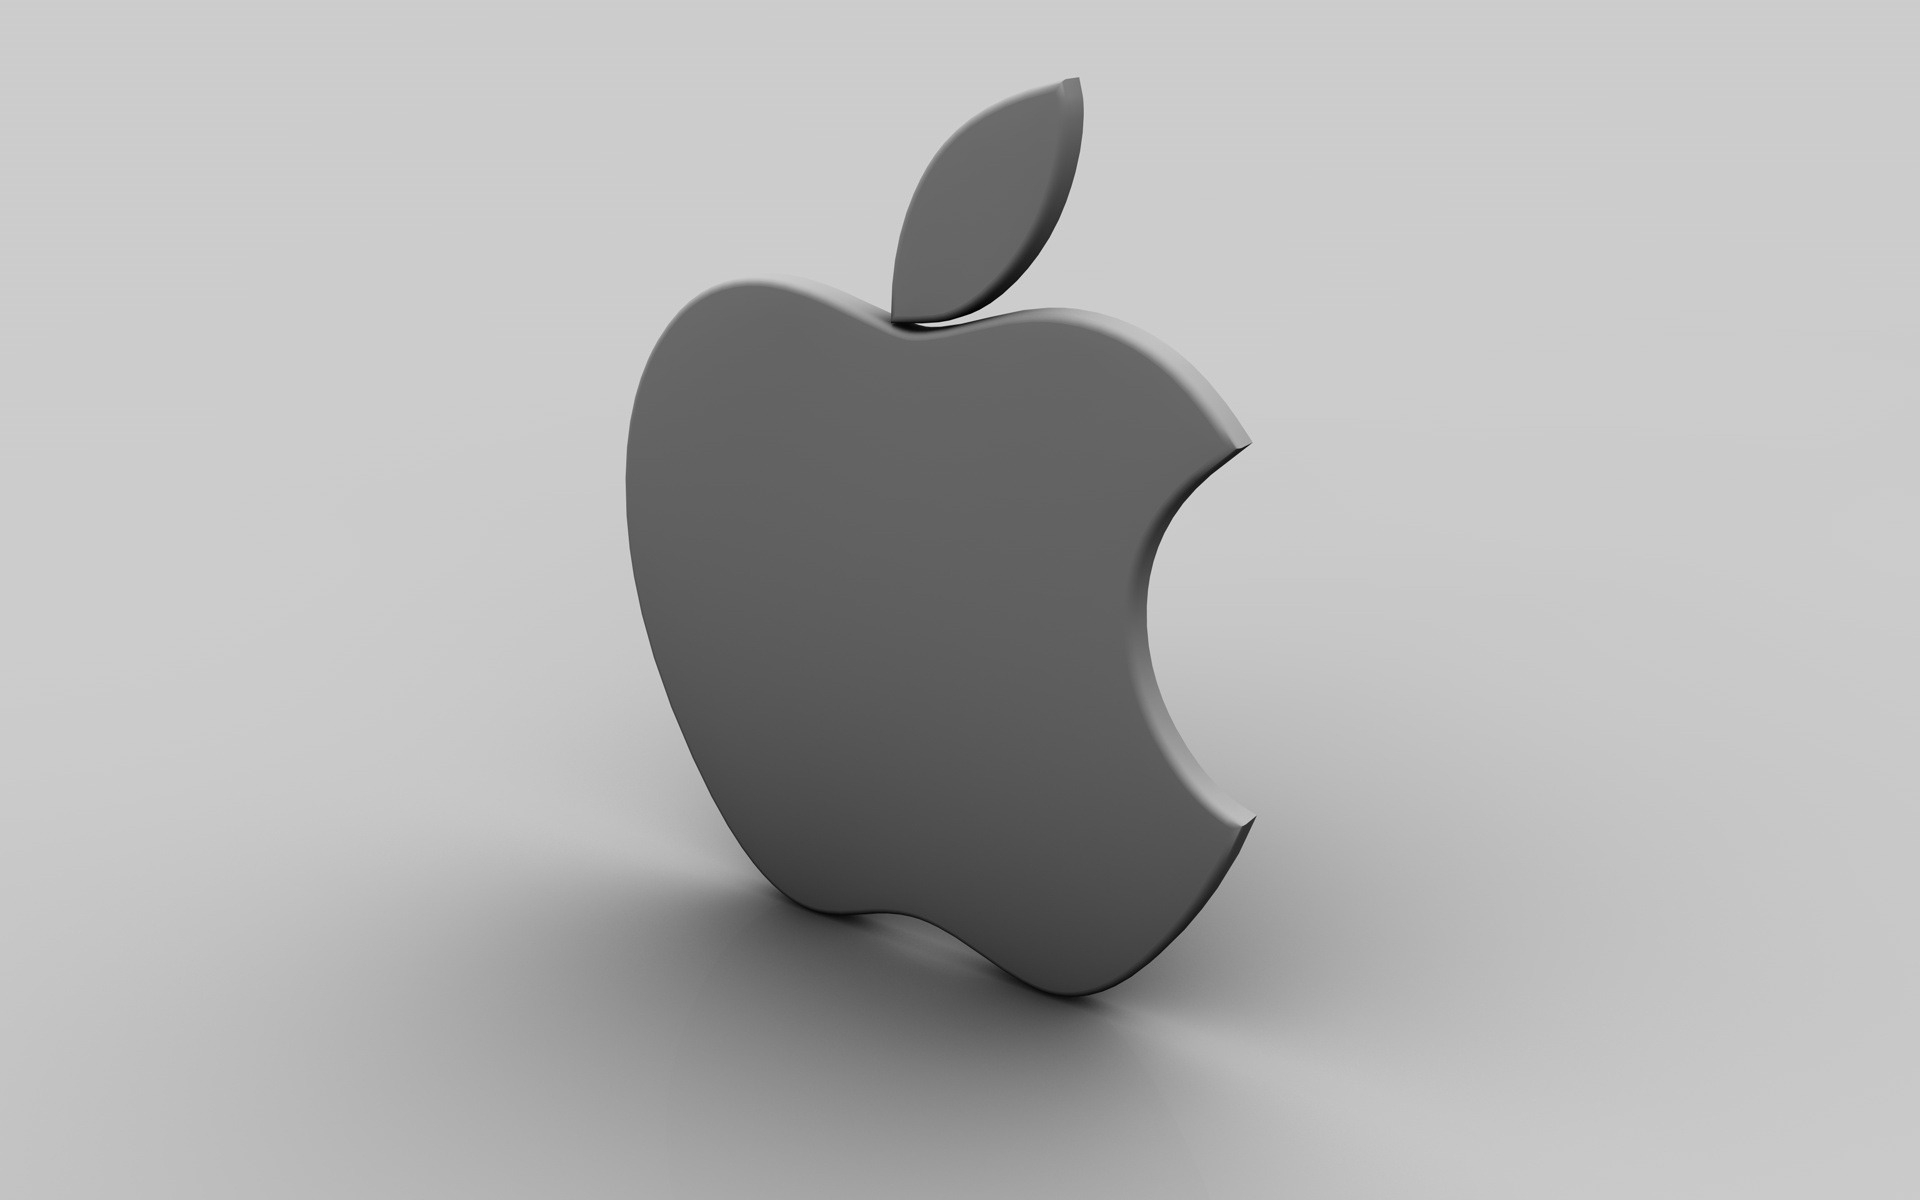 apple, background, objects, gray Image for desktop